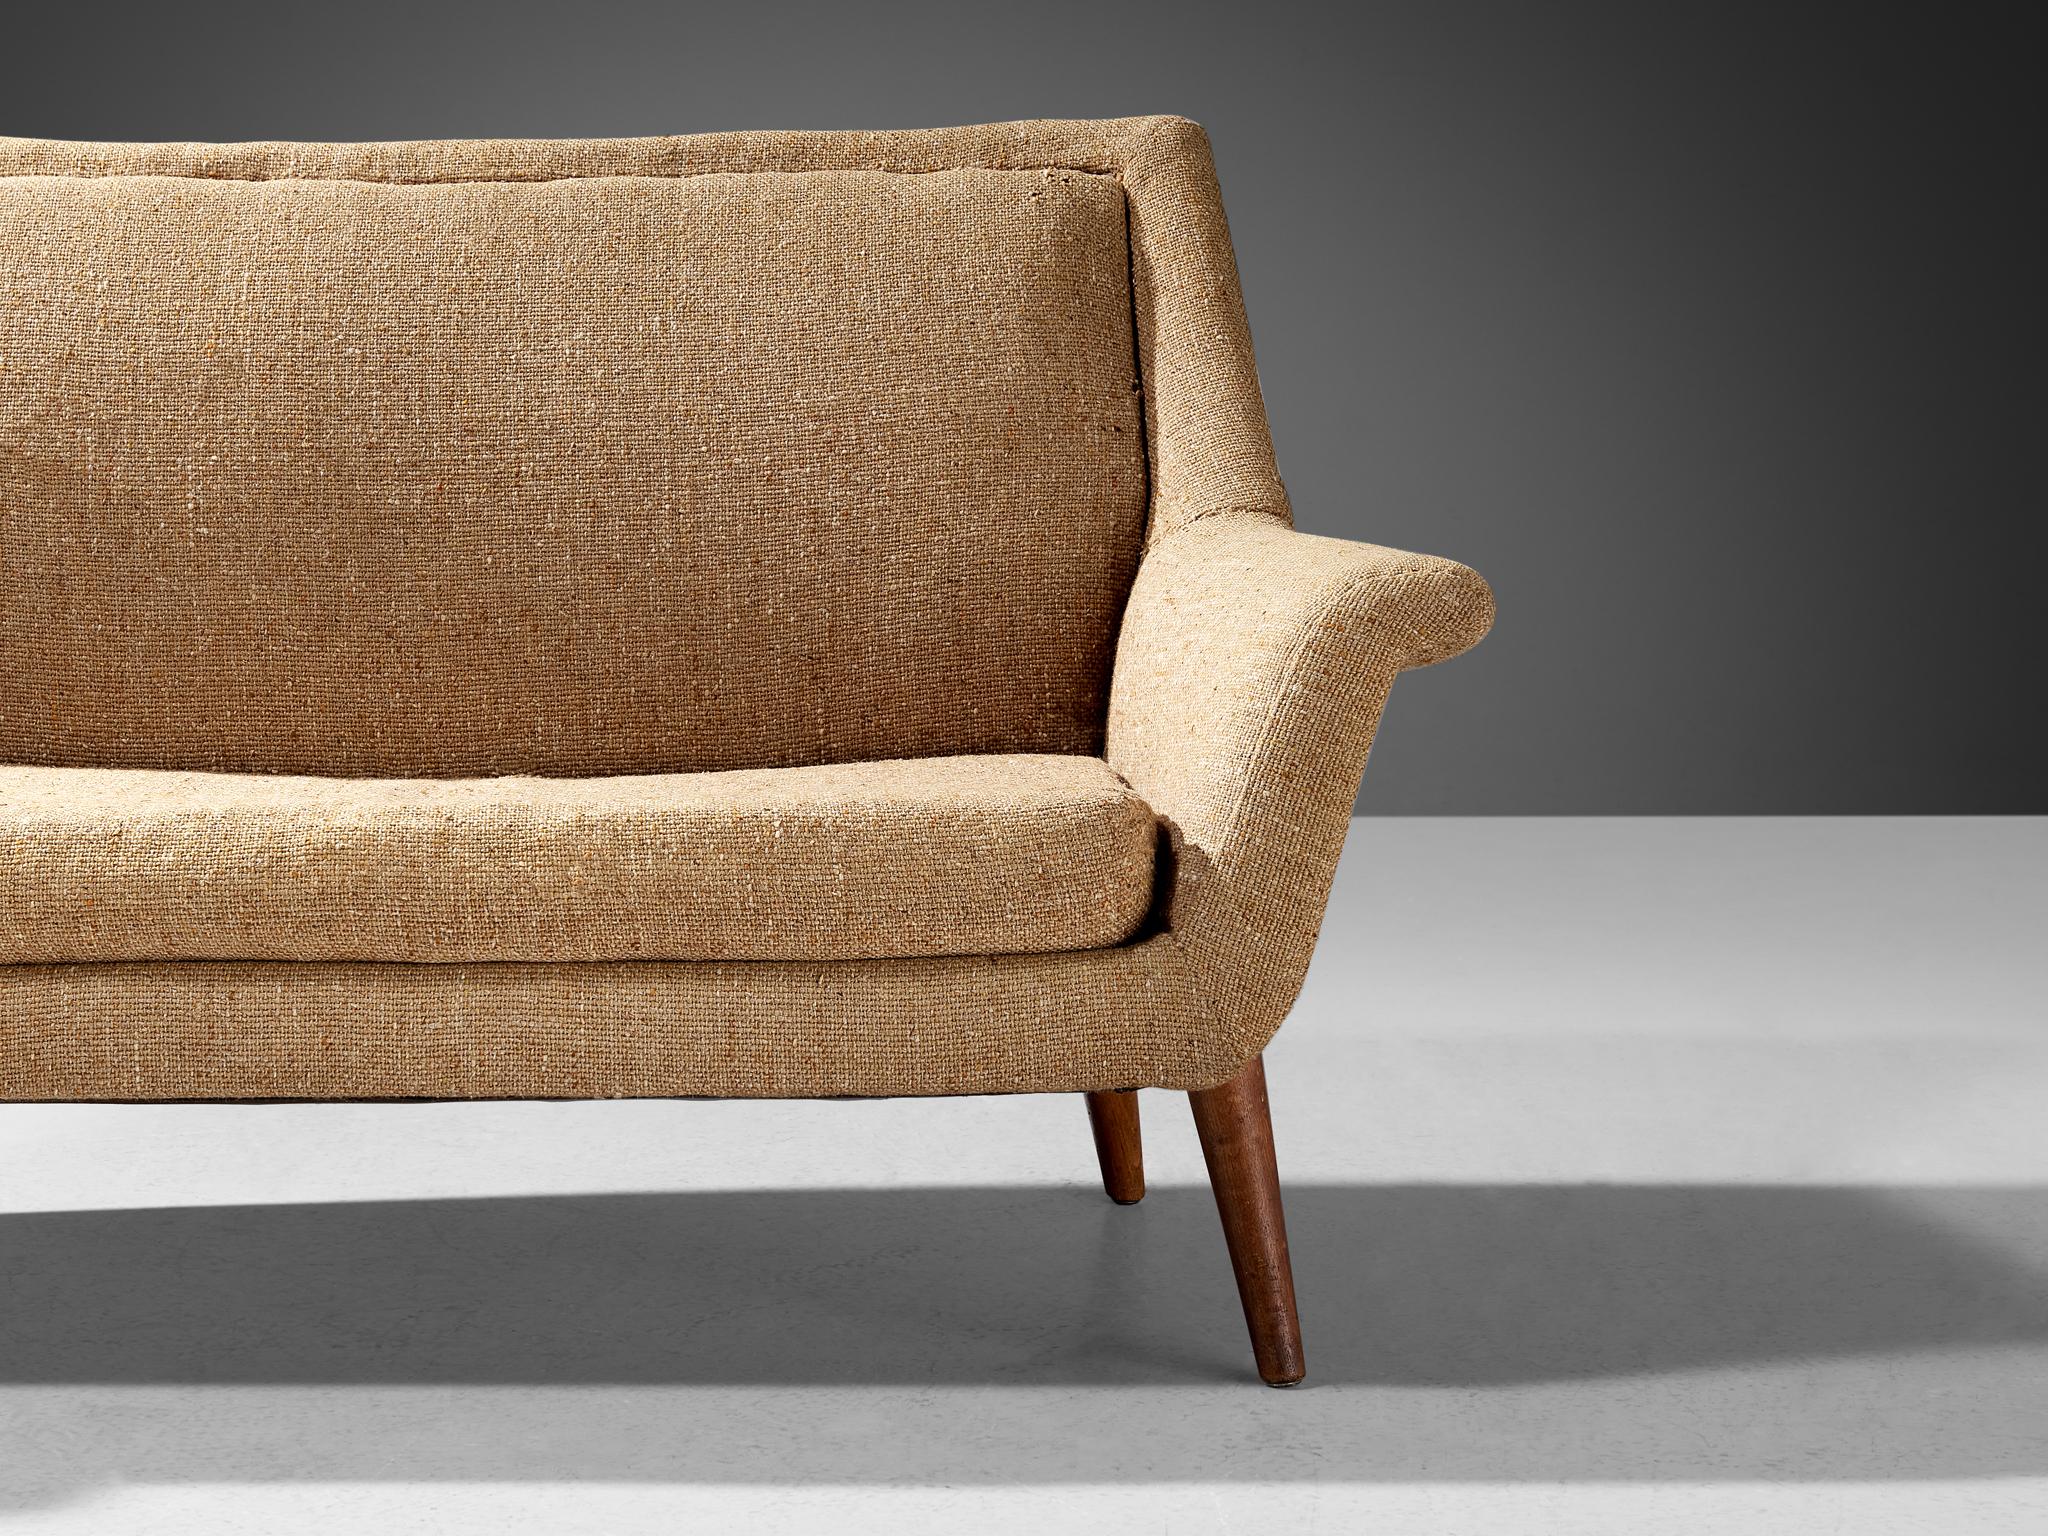 English Mid-Century Modern Sofa in Beige Wool and Teak  For Sale 1